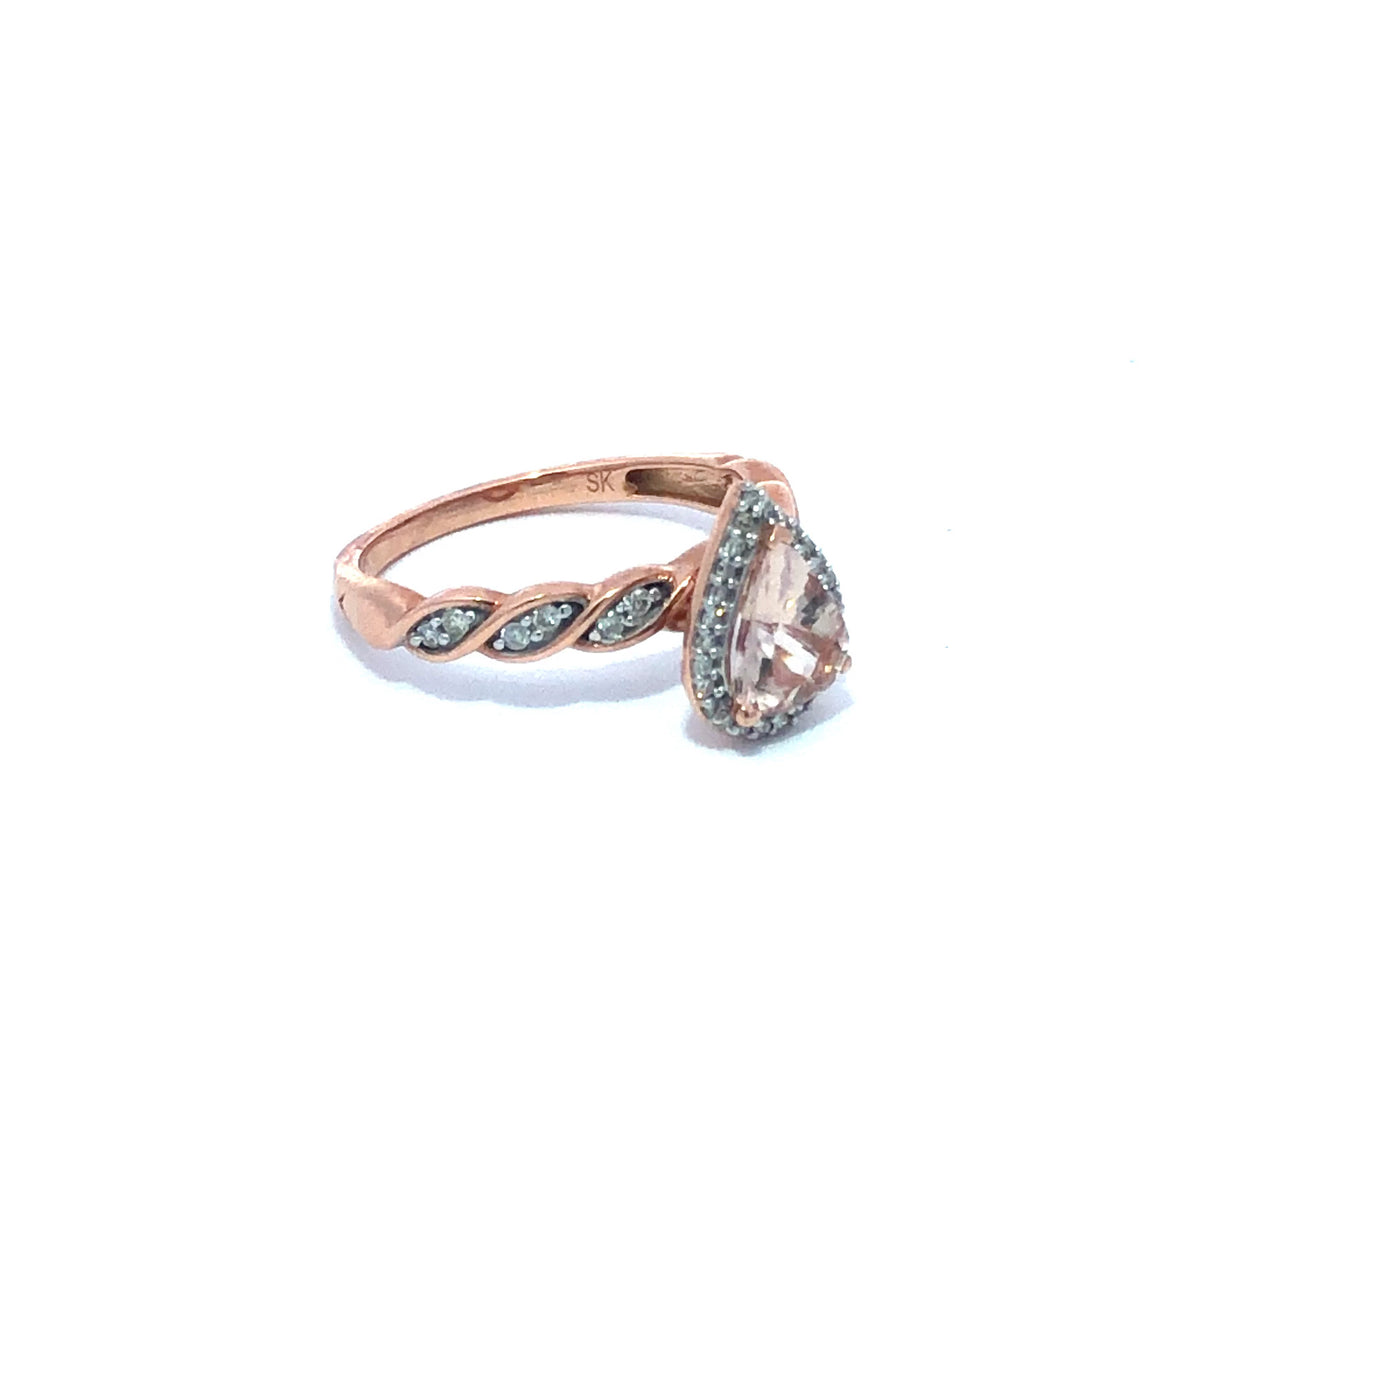 10Ct Rose Gold Pear Shaped Morganite And Diamond Halo Ring With Twist Band.